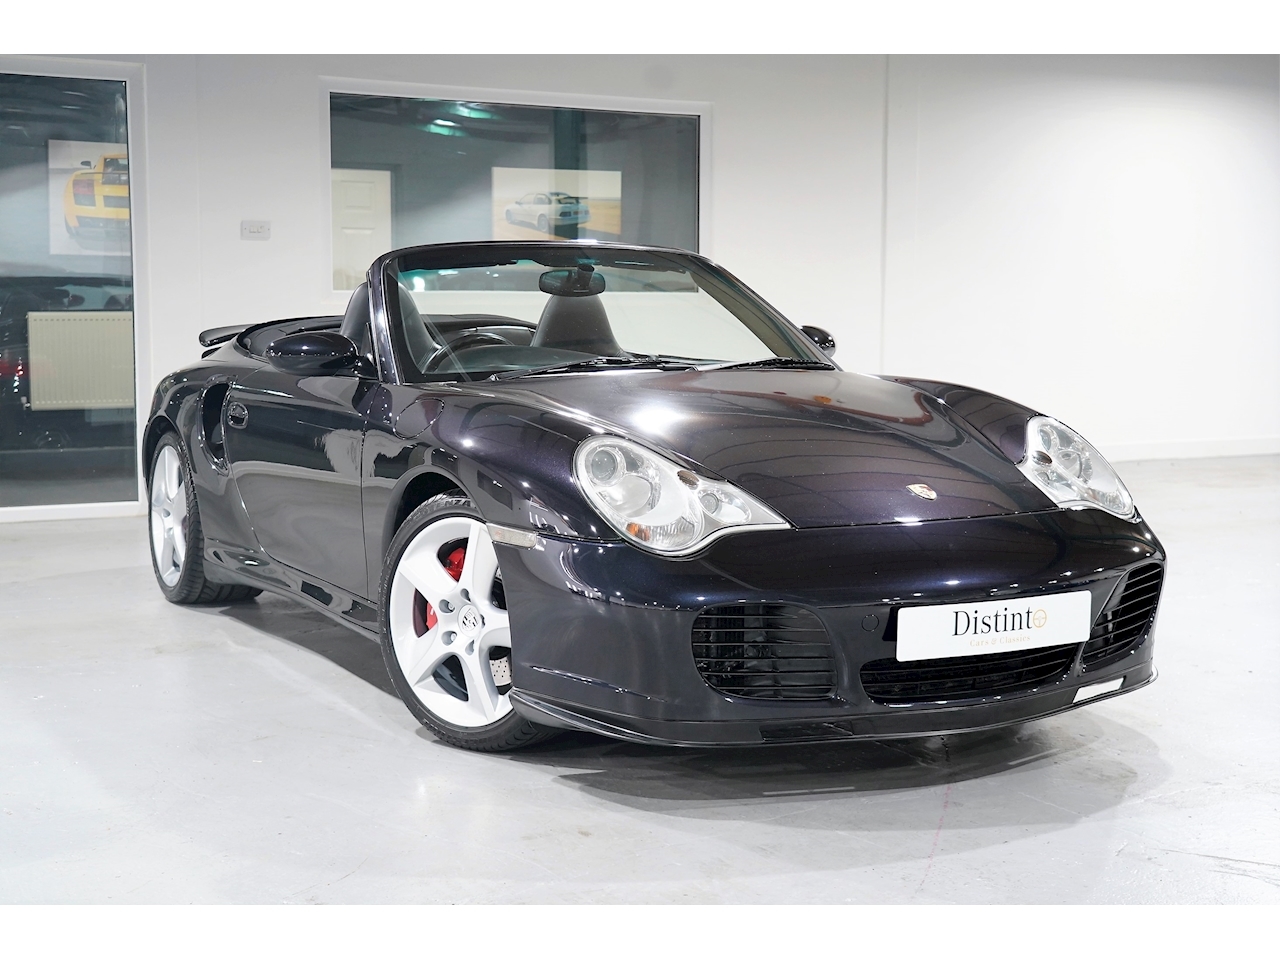 Used 2003 Porsche 2003 Porsche 911 996 Turbo  Tiptronic S Cabriolet -  Basalt Black - X50 Performance Pack For Sale in West Midlands | Distinto  Collection Limited